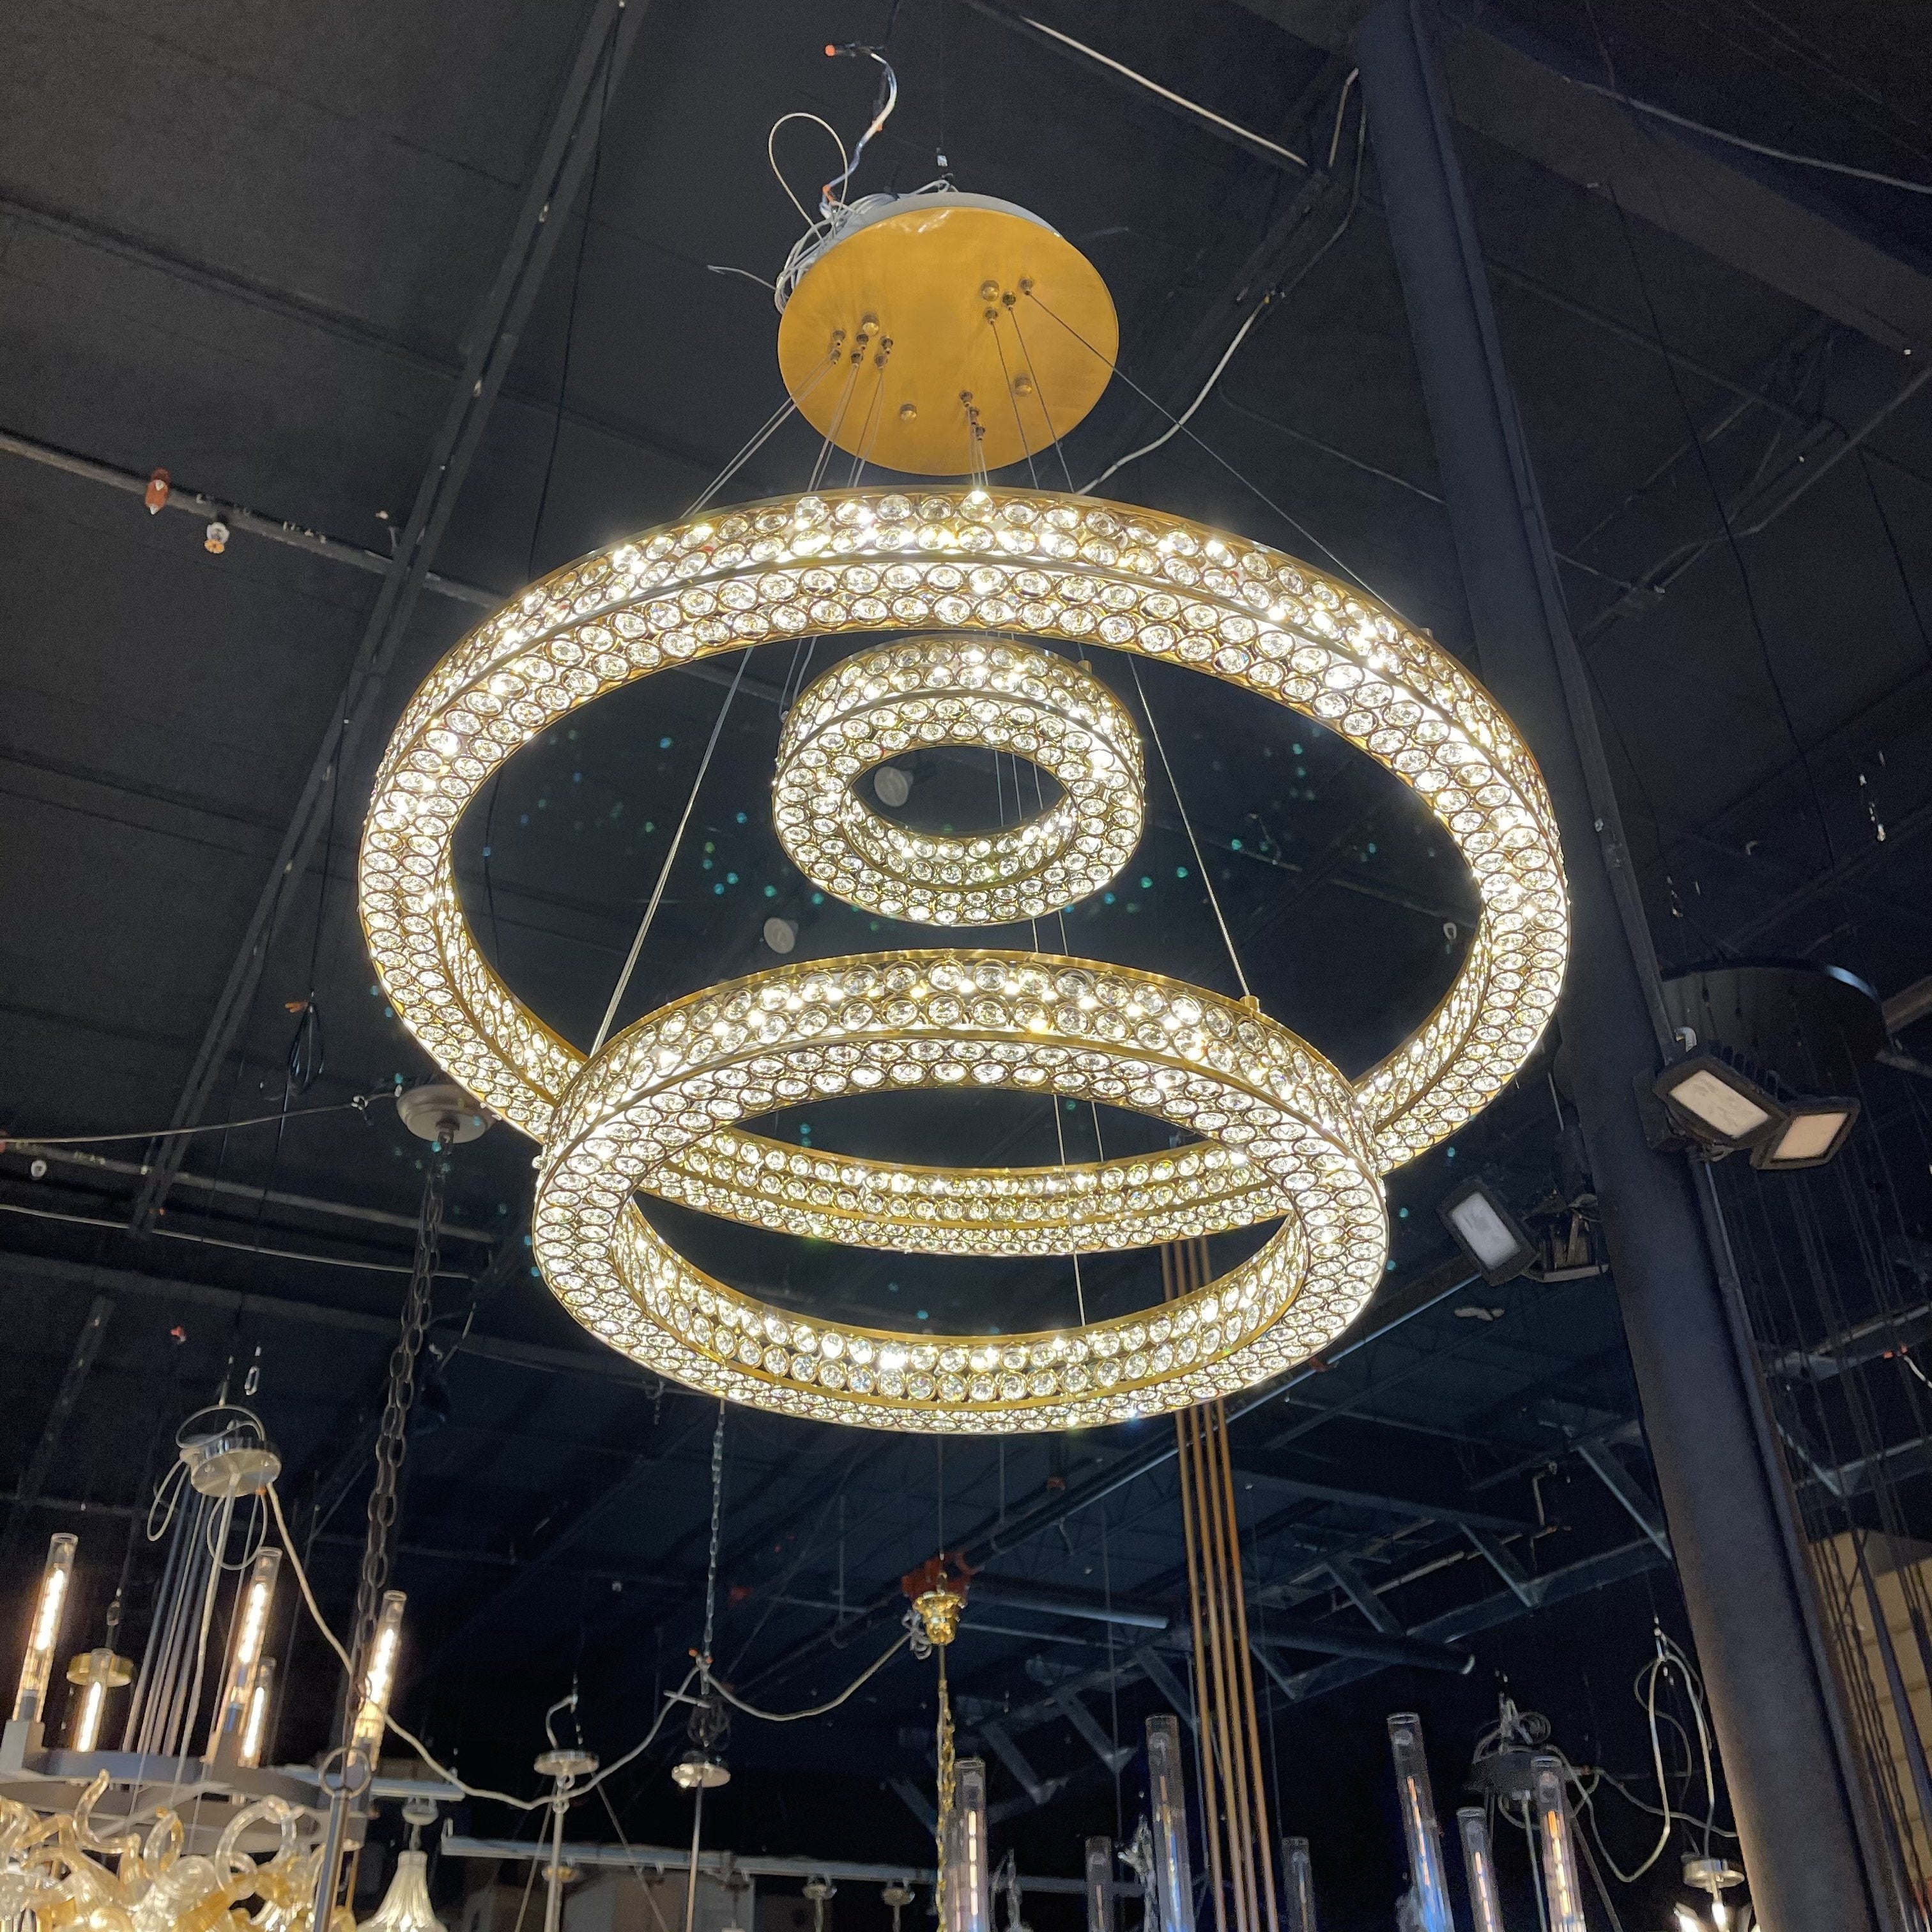 Perriello 28"W Tiered LED Crystal Ring Pendant - Italian Concept